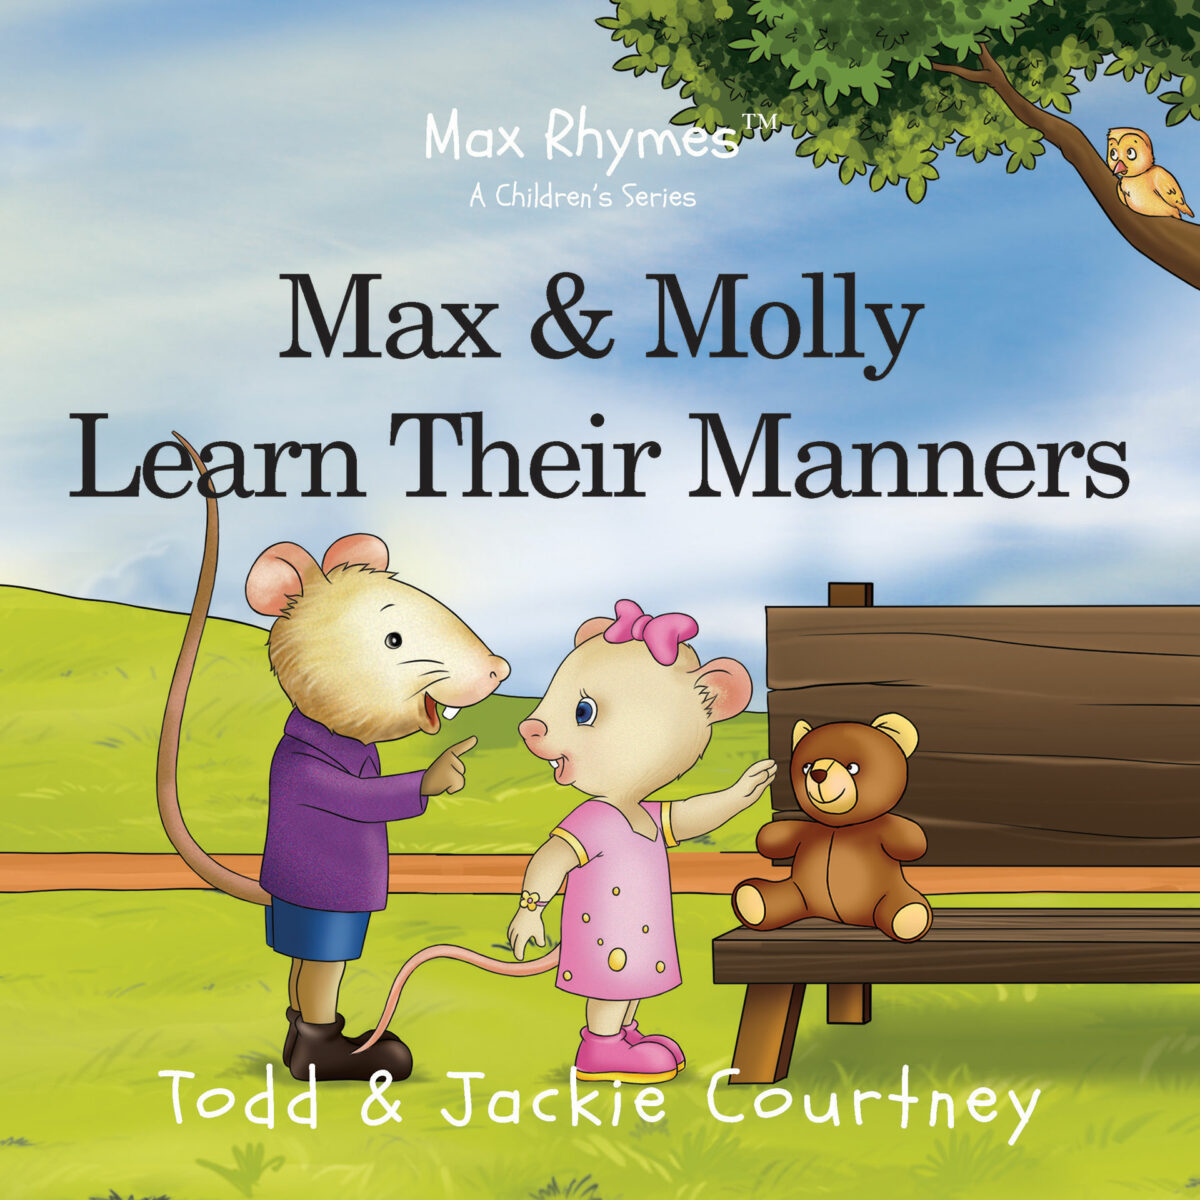 Book Cover-Max & Molly Learn Their Manners